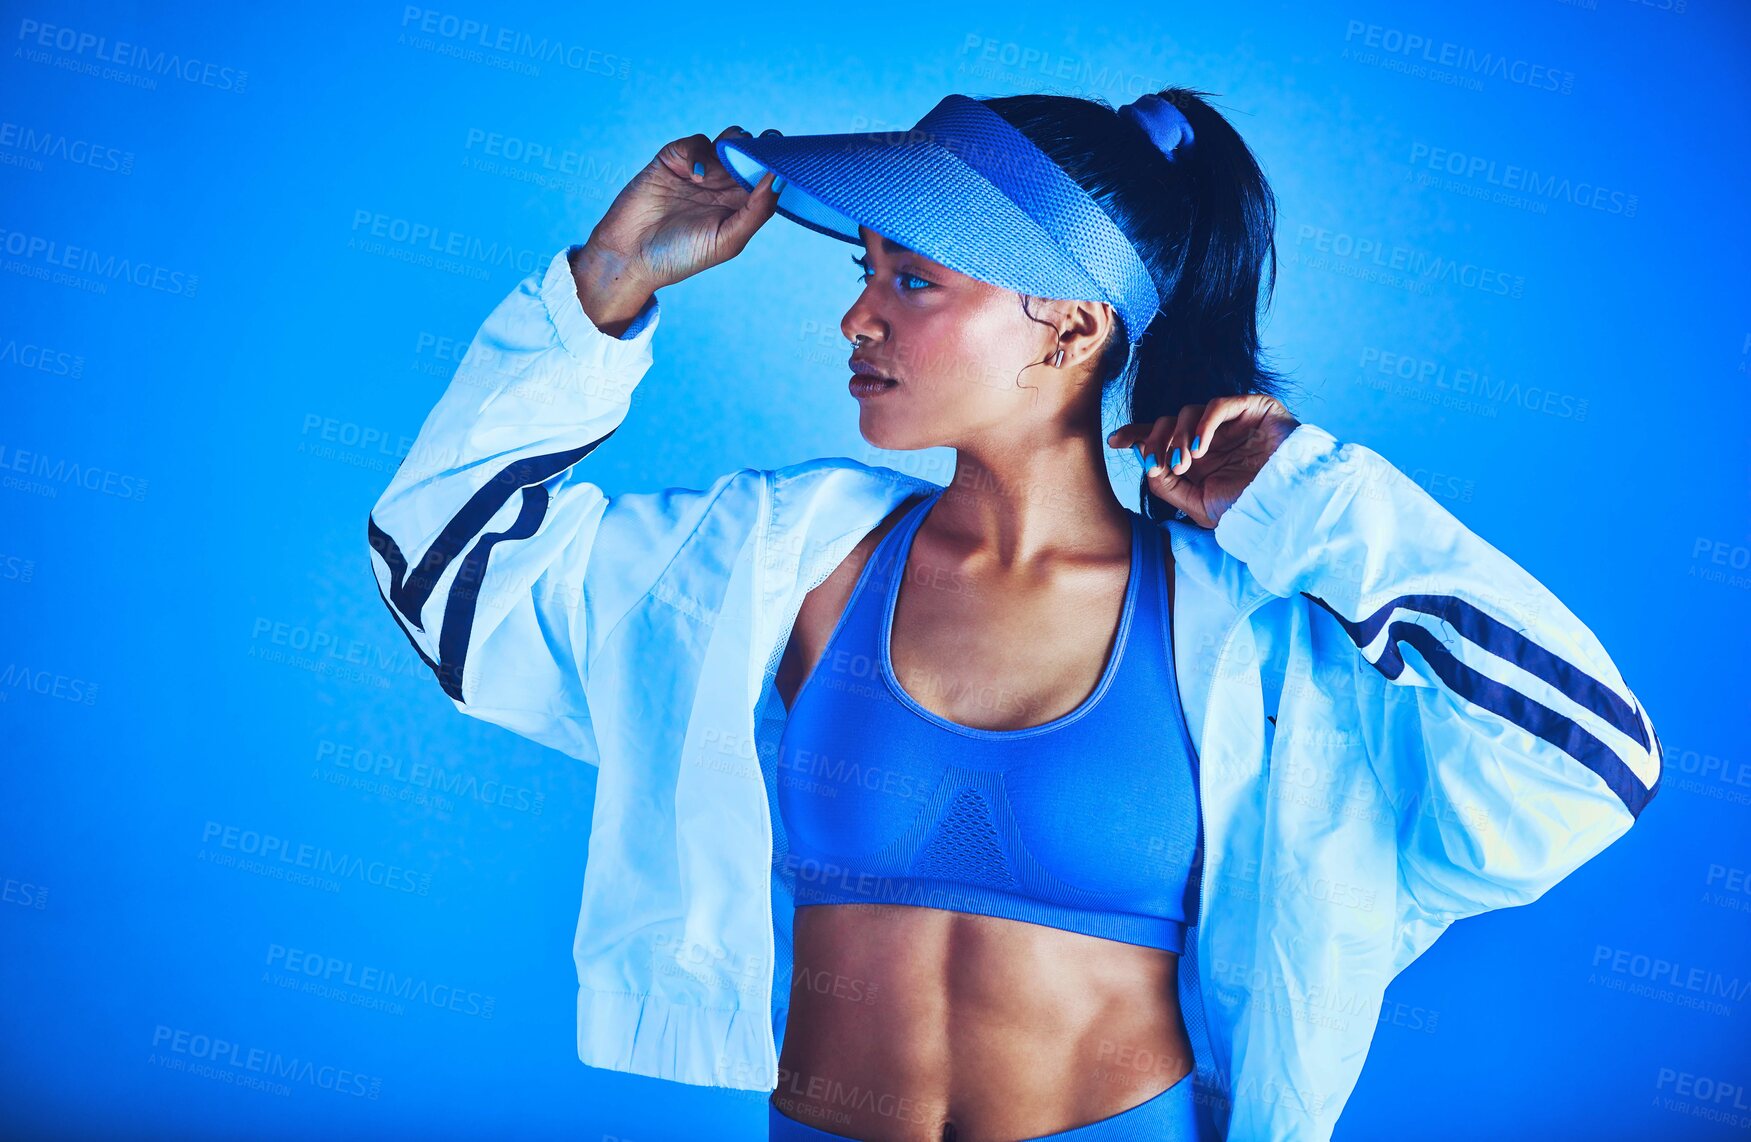 Buy stock photo Cropped shot of an attractive young female athlete posing against a blue background